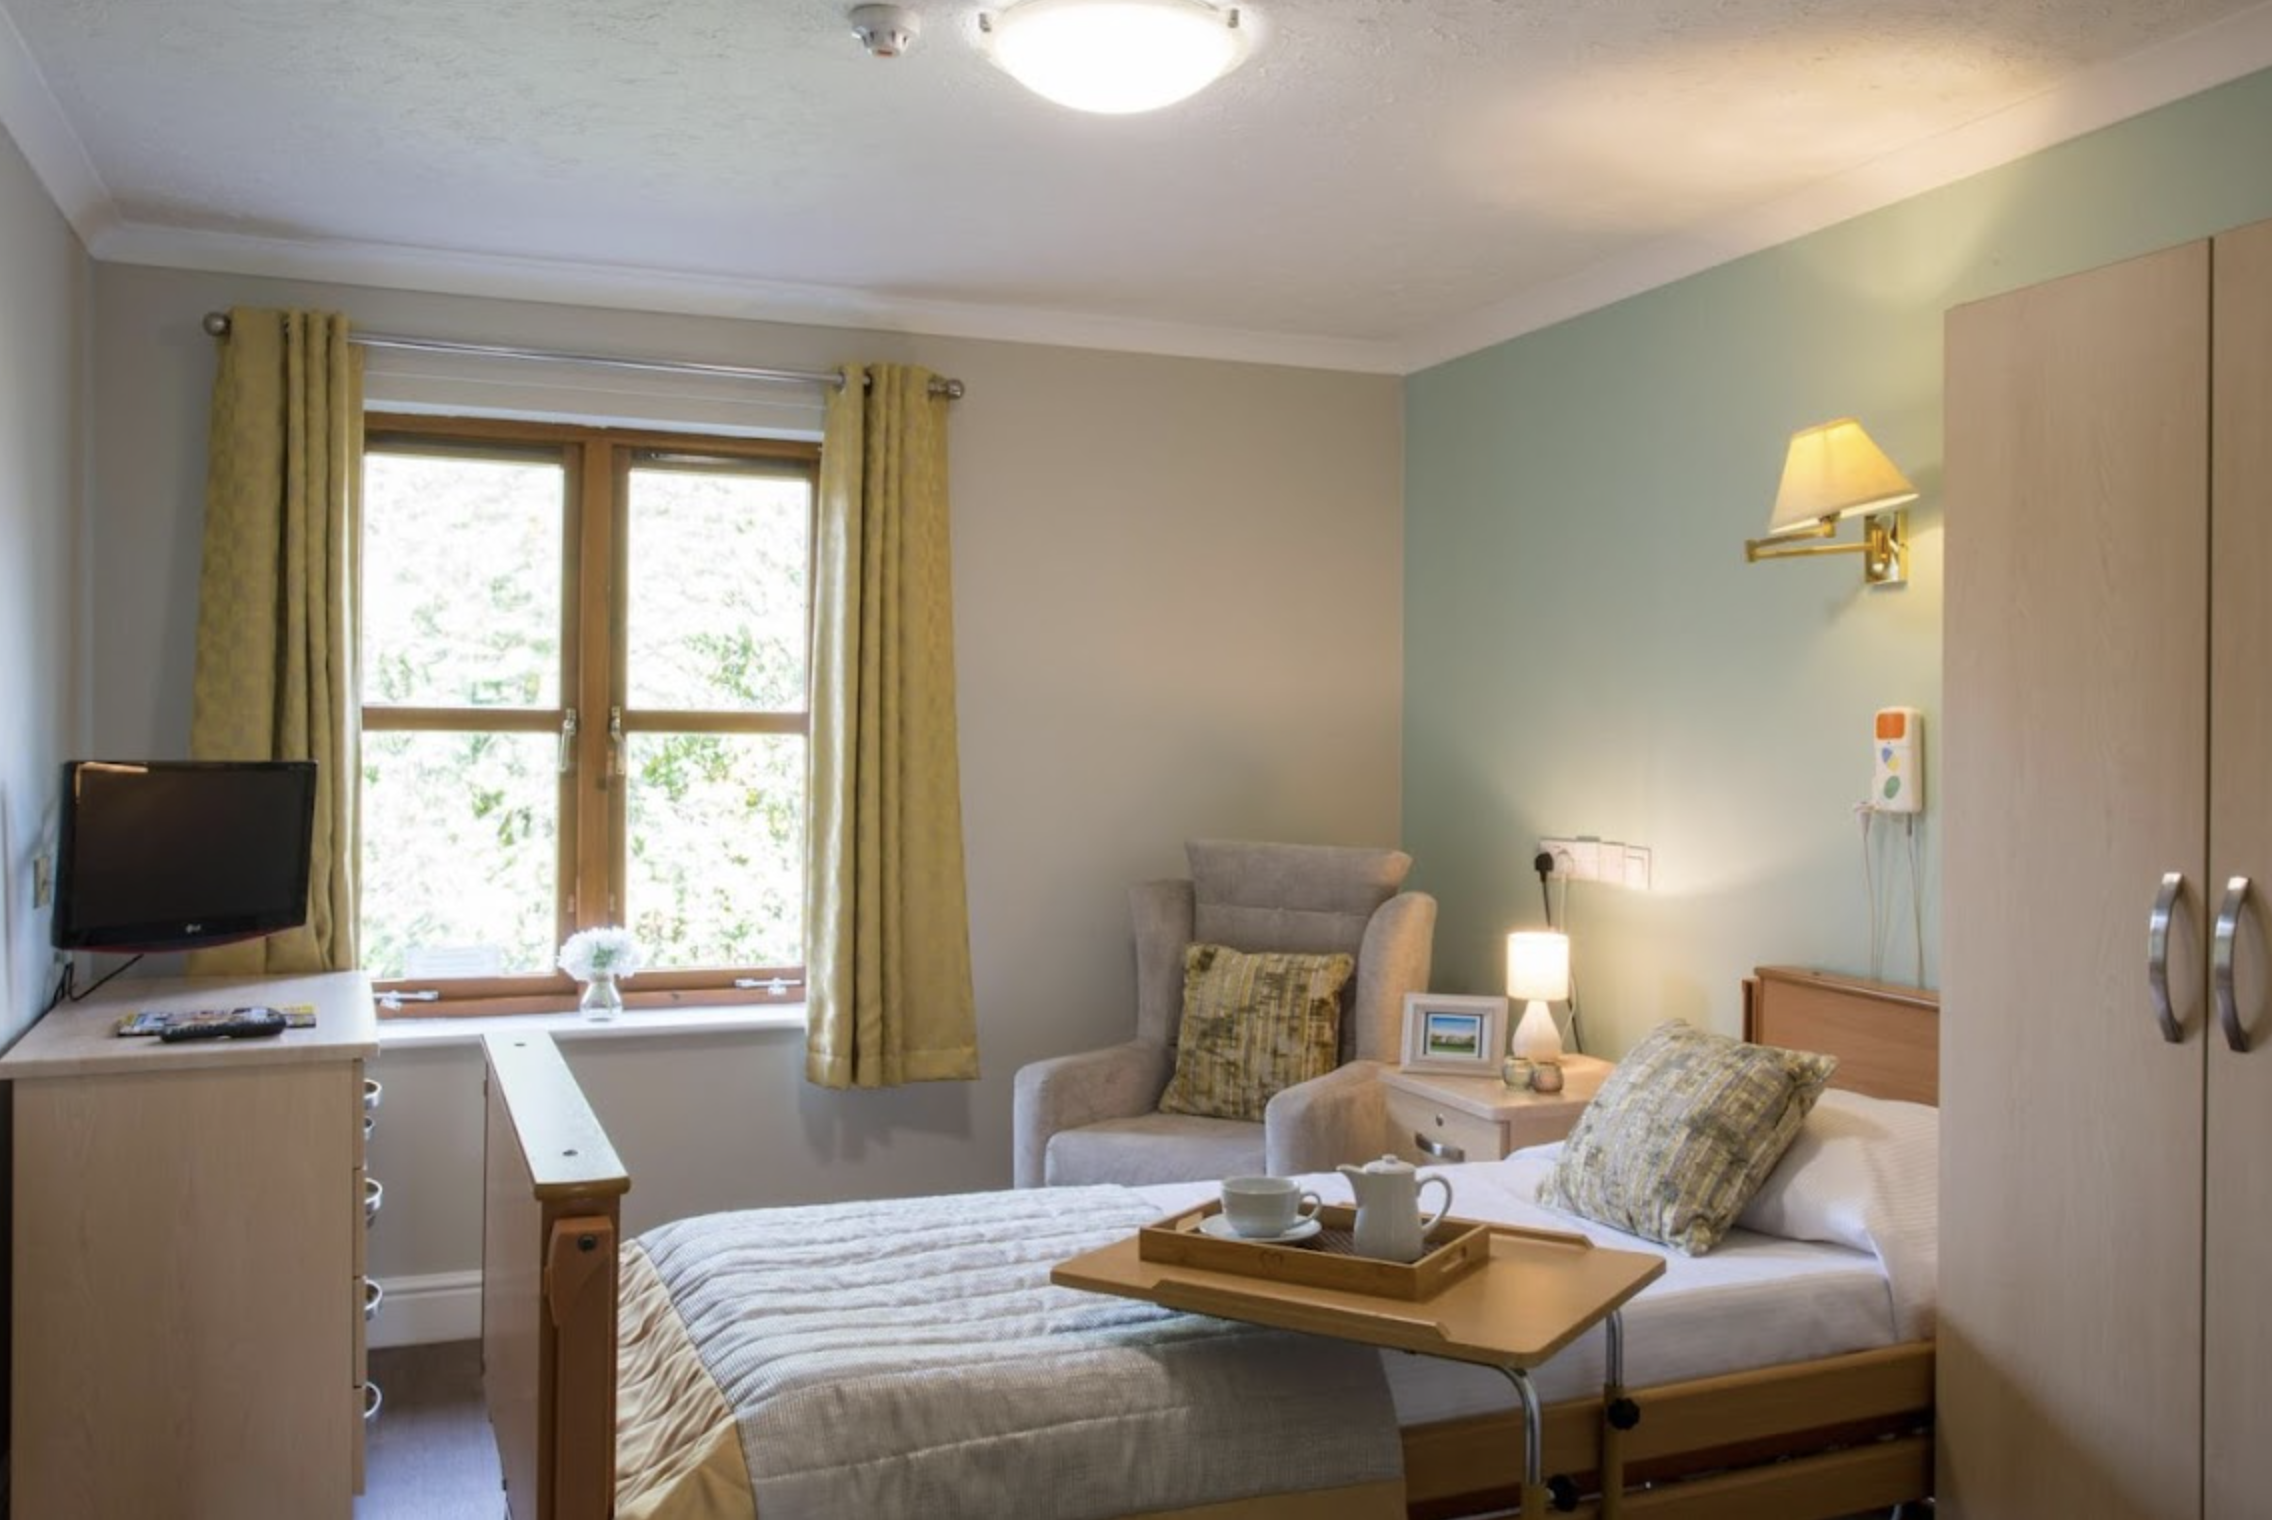 Bedroom of Maypole care home in Southampton, Hampshire